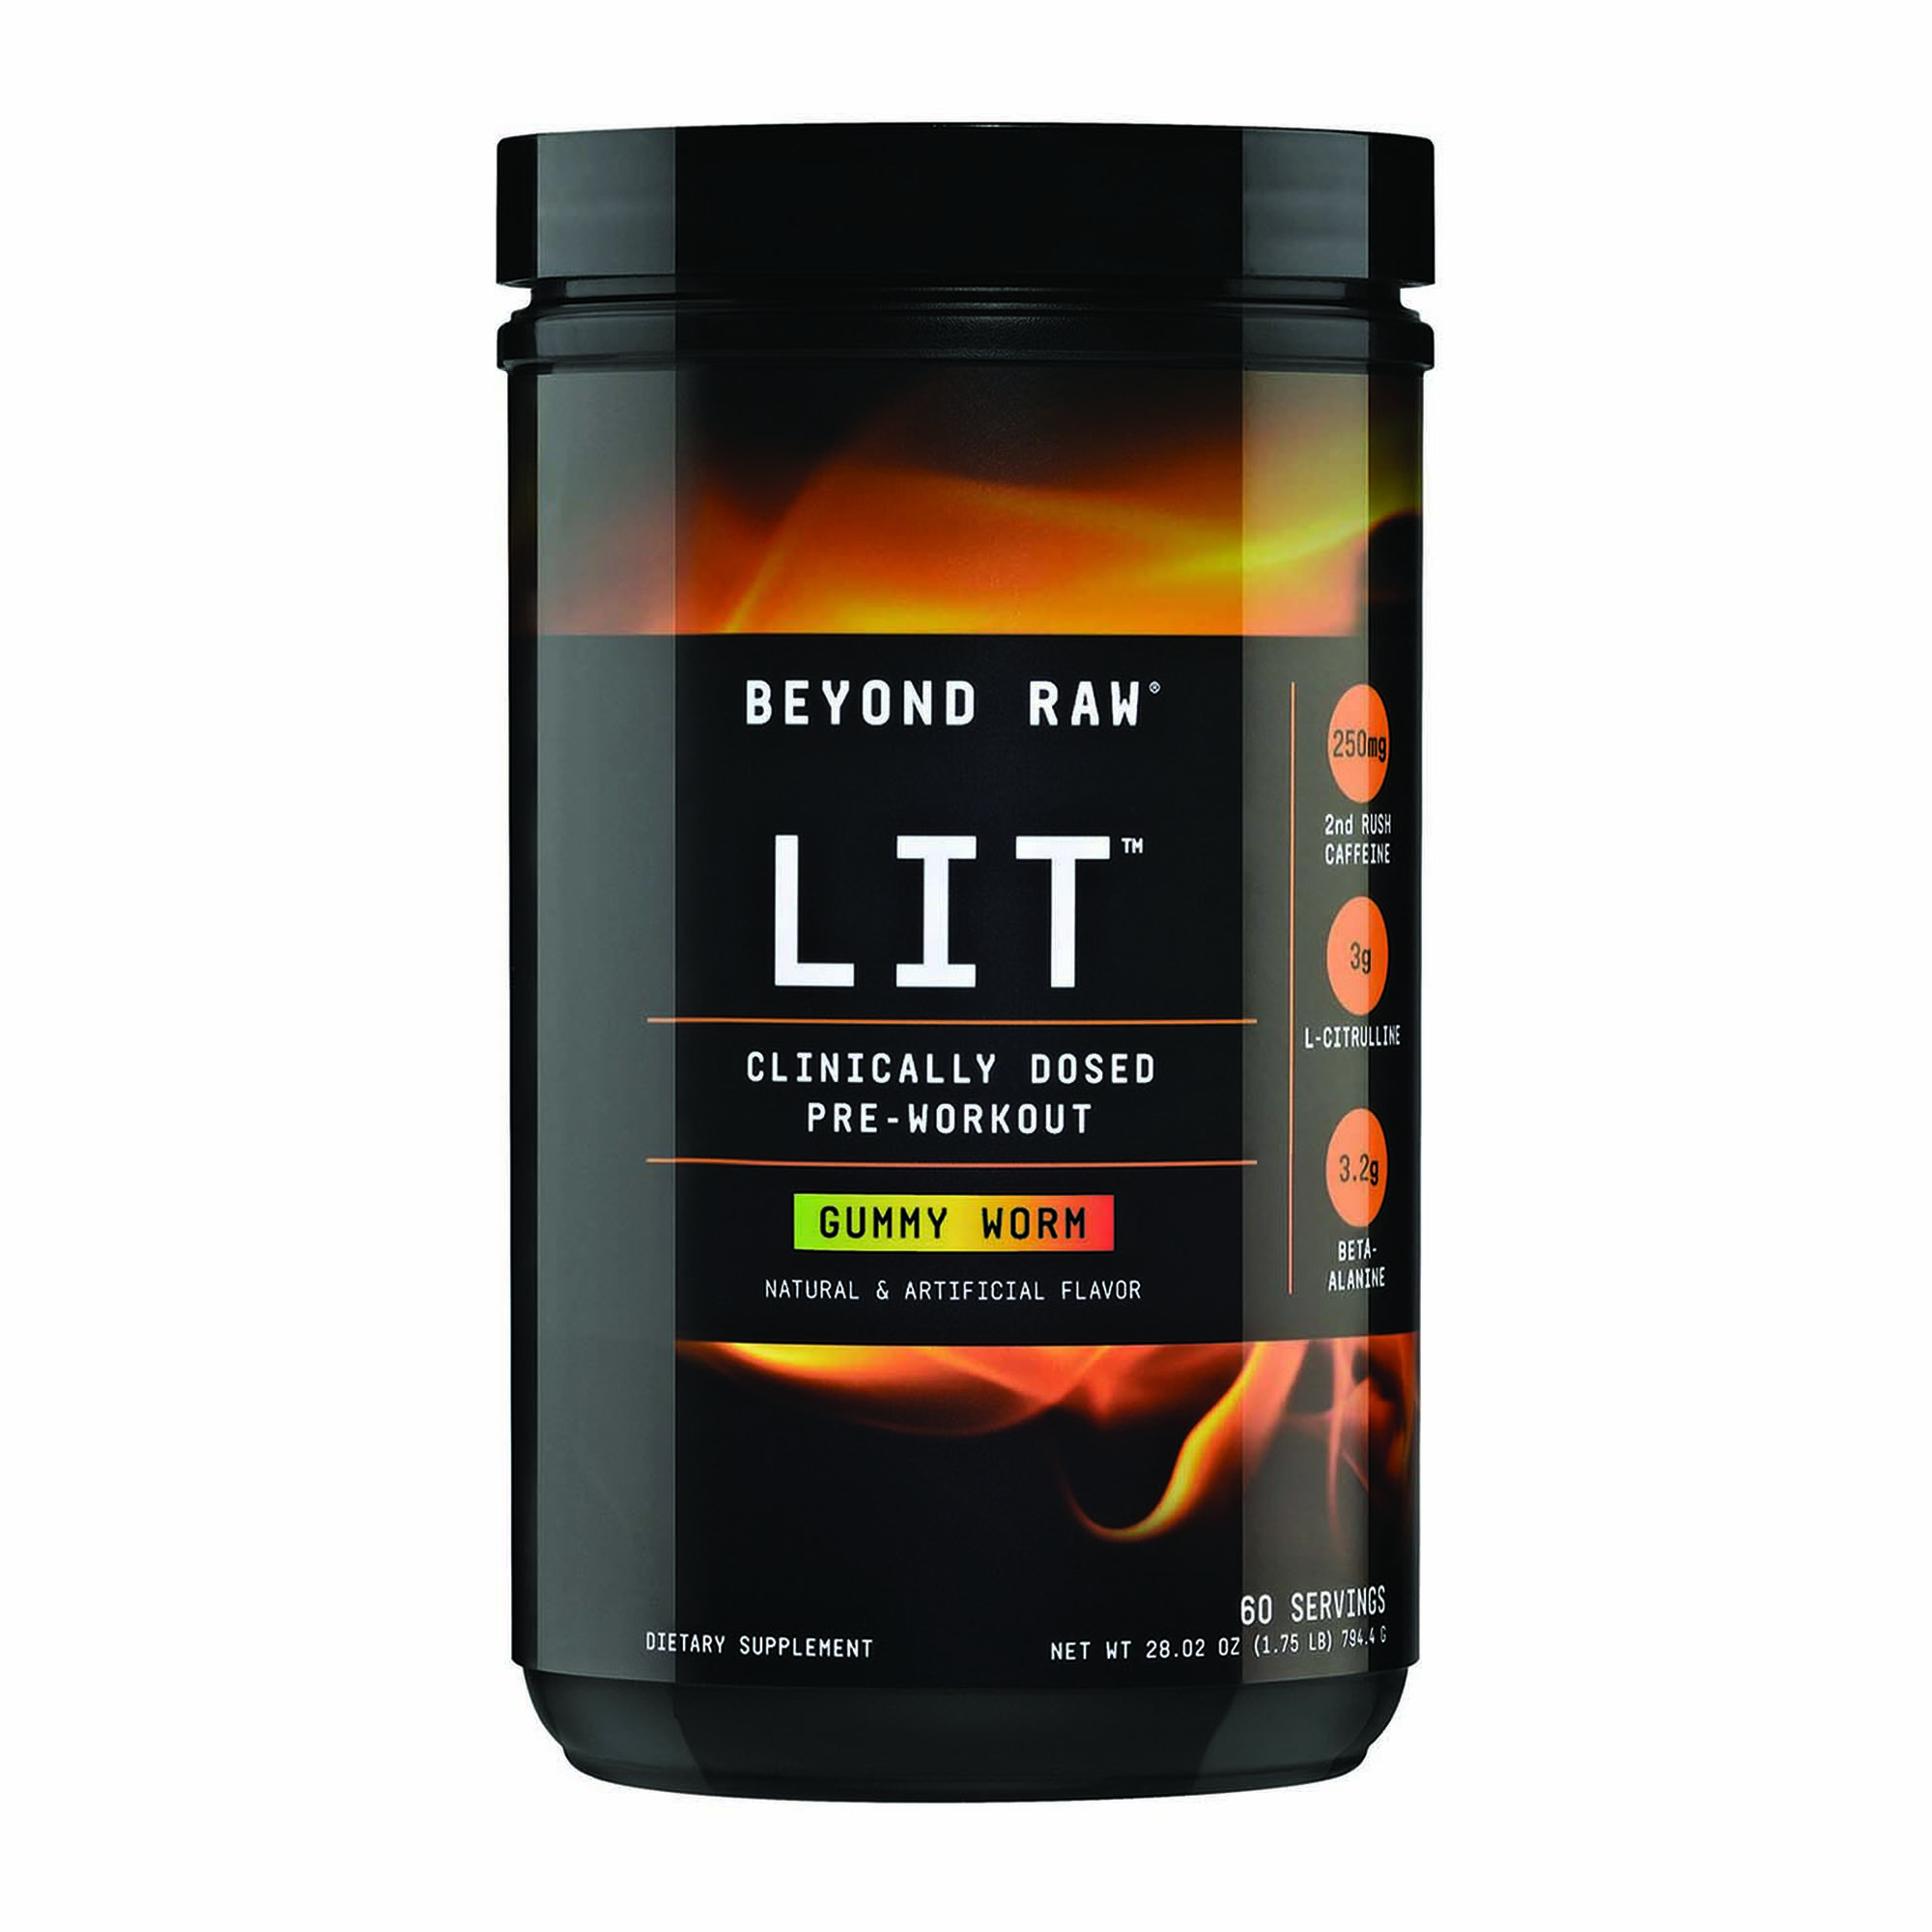 30 Minute Beyond Raw Lit Pre Workout Gummy Worm Review for Build Muscle